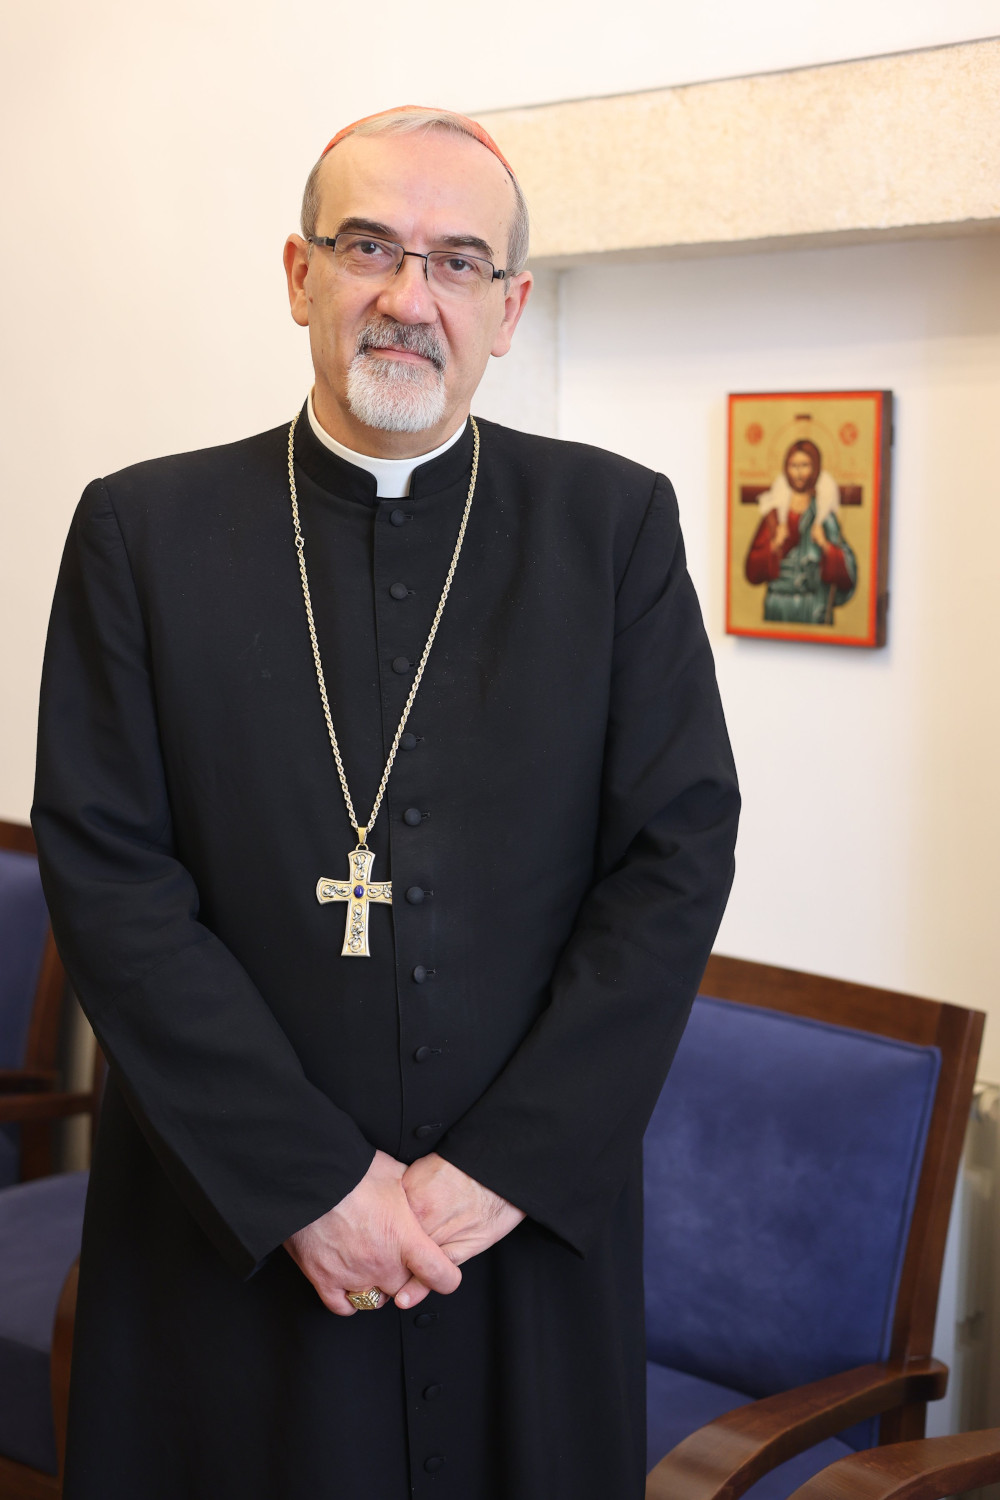 A white man wearing a cassock and a pectoral cross stands and looks at the camera